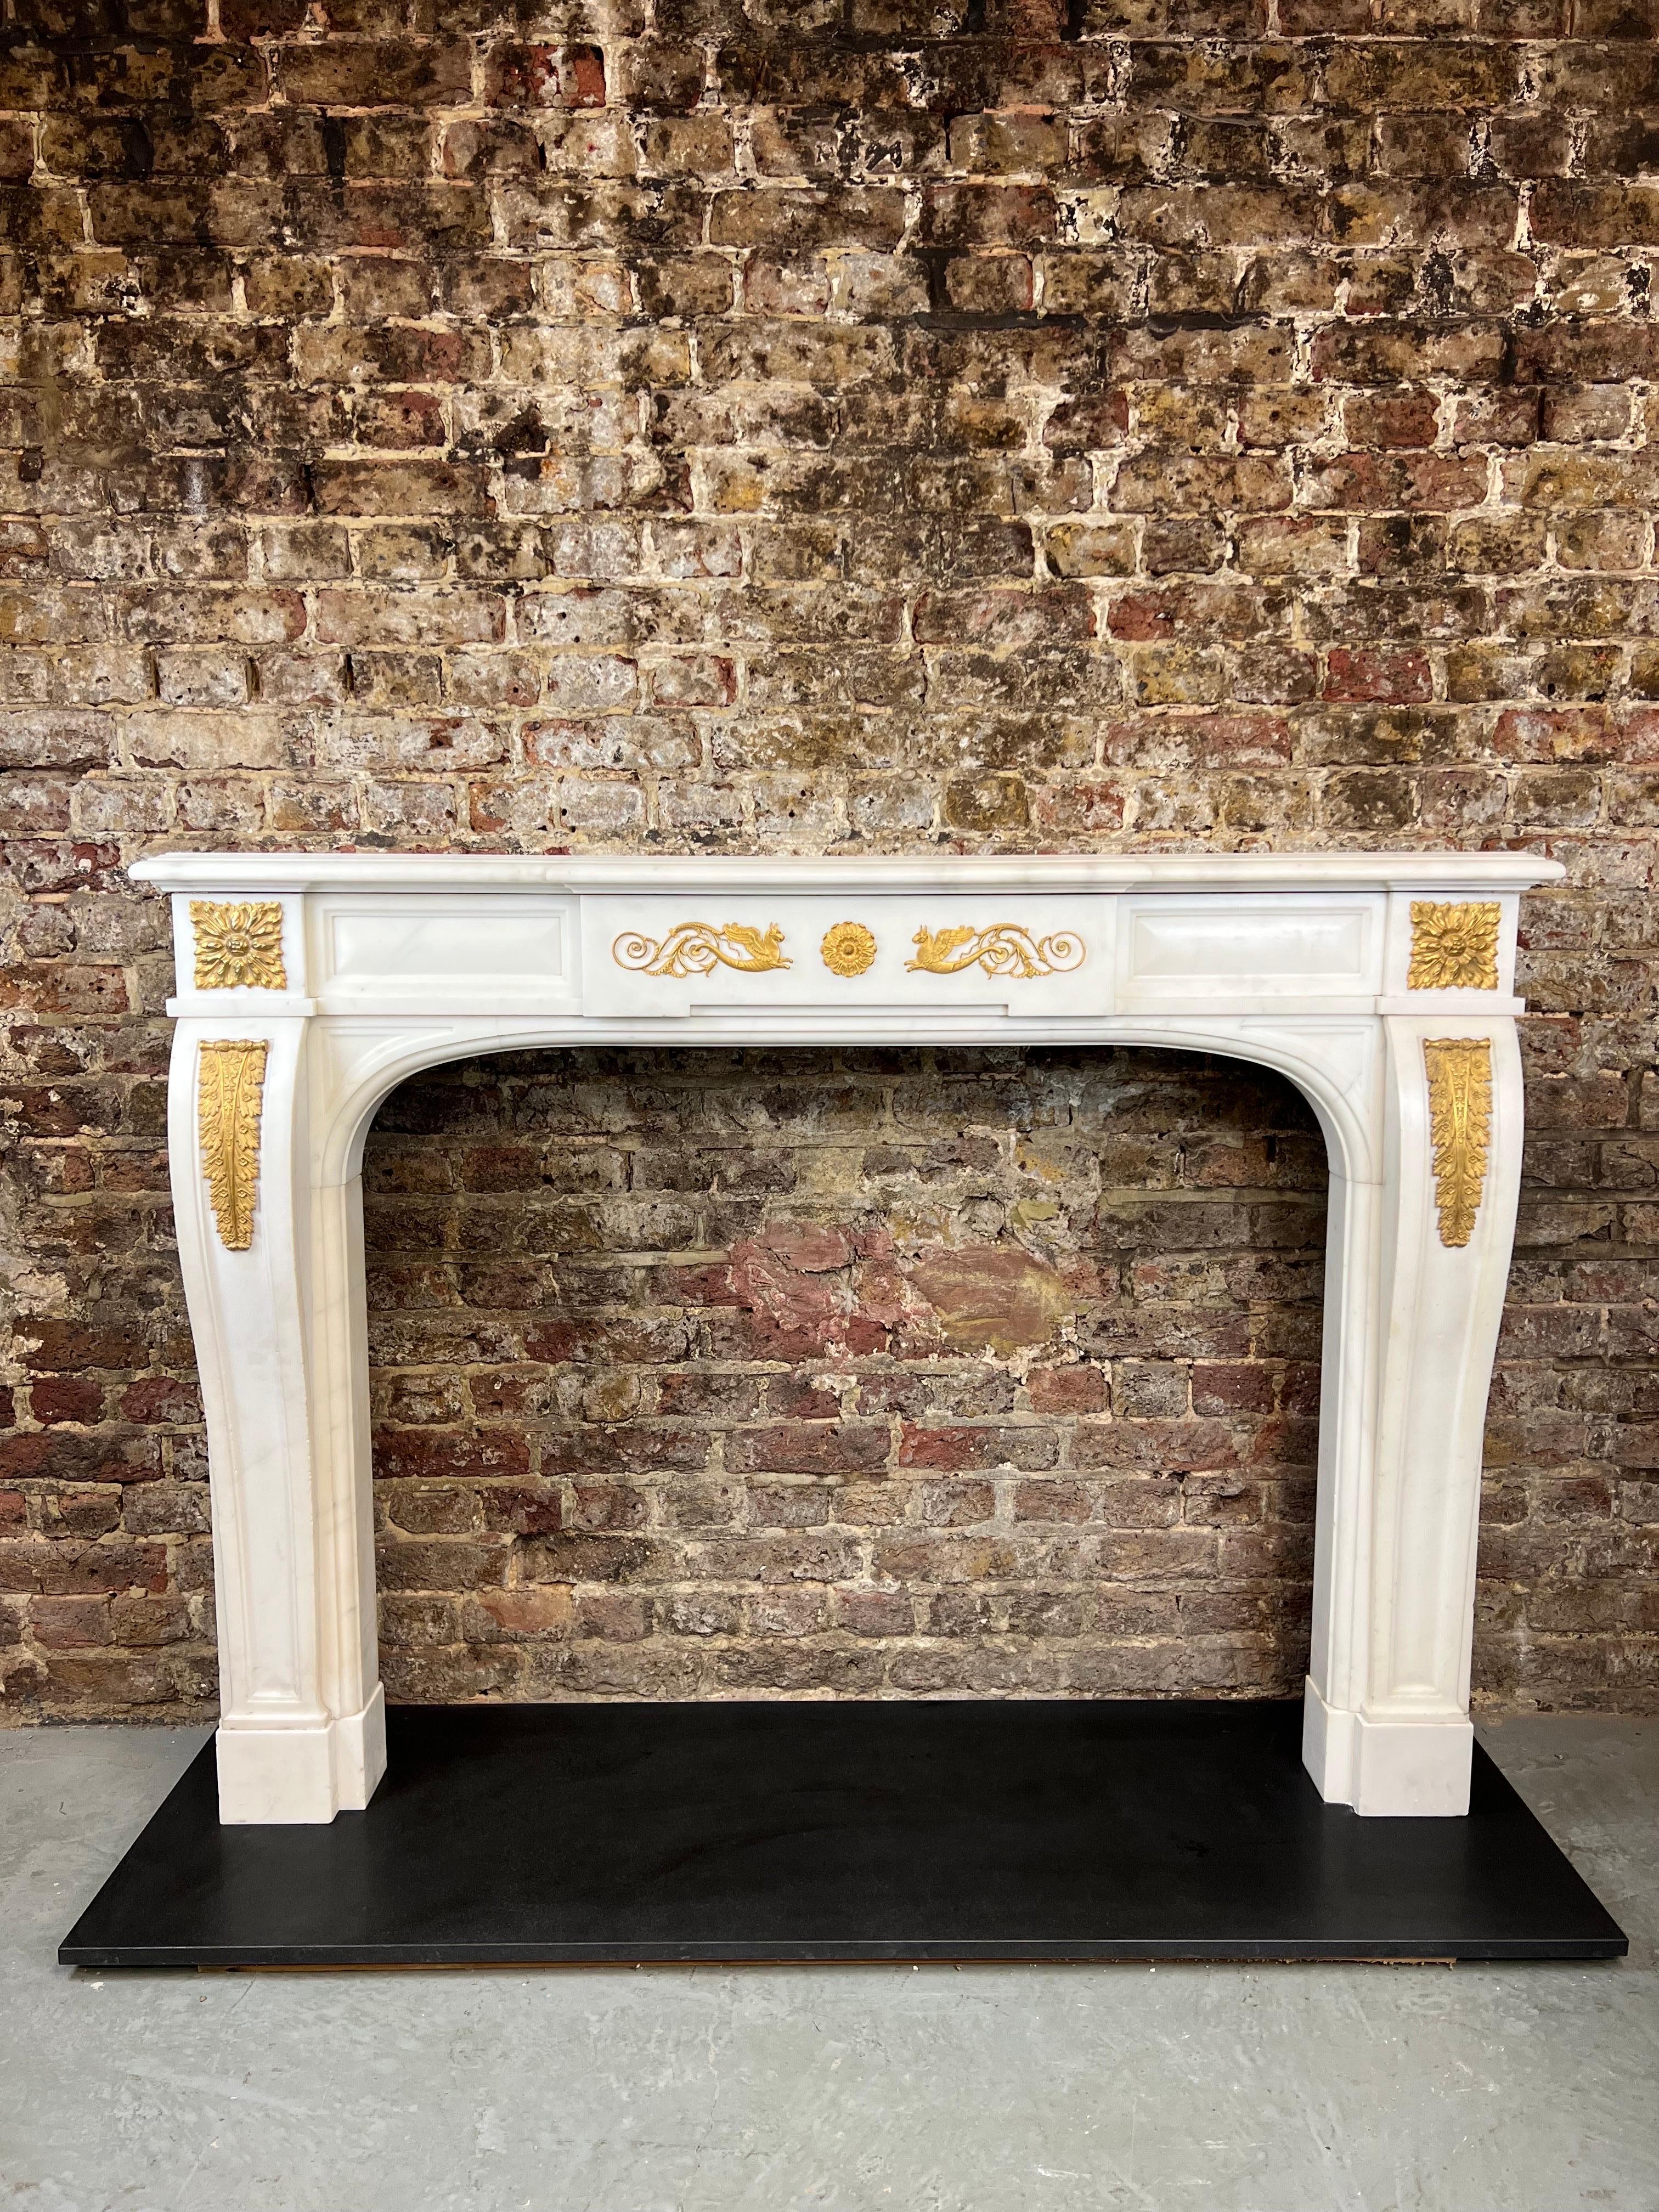 20th Century pair of statuary marble & ormolu fireplaces.
Early 20th Century (Late Victorian) Pair of White Statuary Marble Chimneypieces, 
With Fine Ormolu Mounts To The Upright Jambs And Central Frieze & Tablets.
Recently Salvaged From A